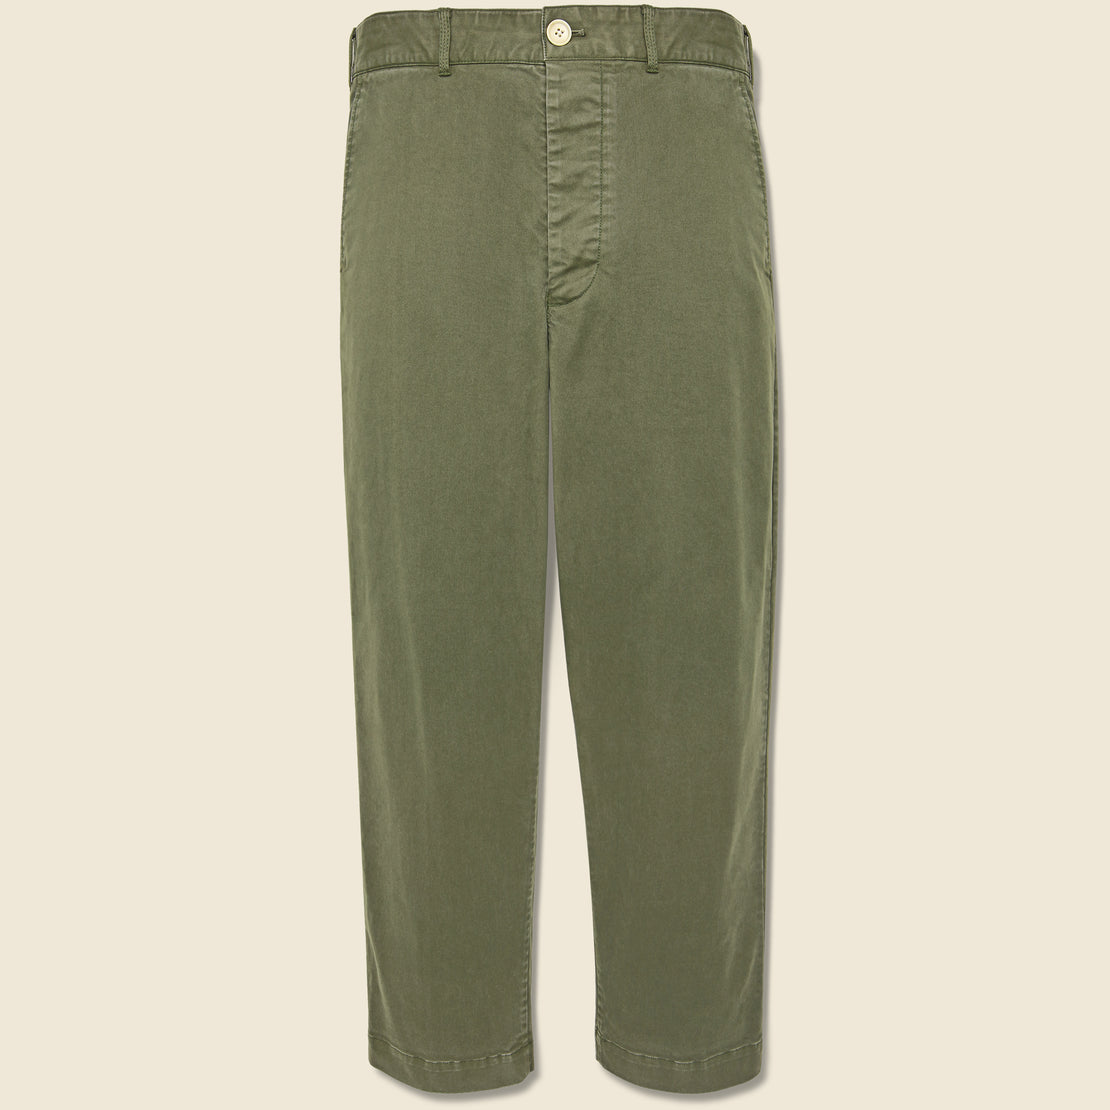 Alex Mill Flat Front Chino - Military Olive